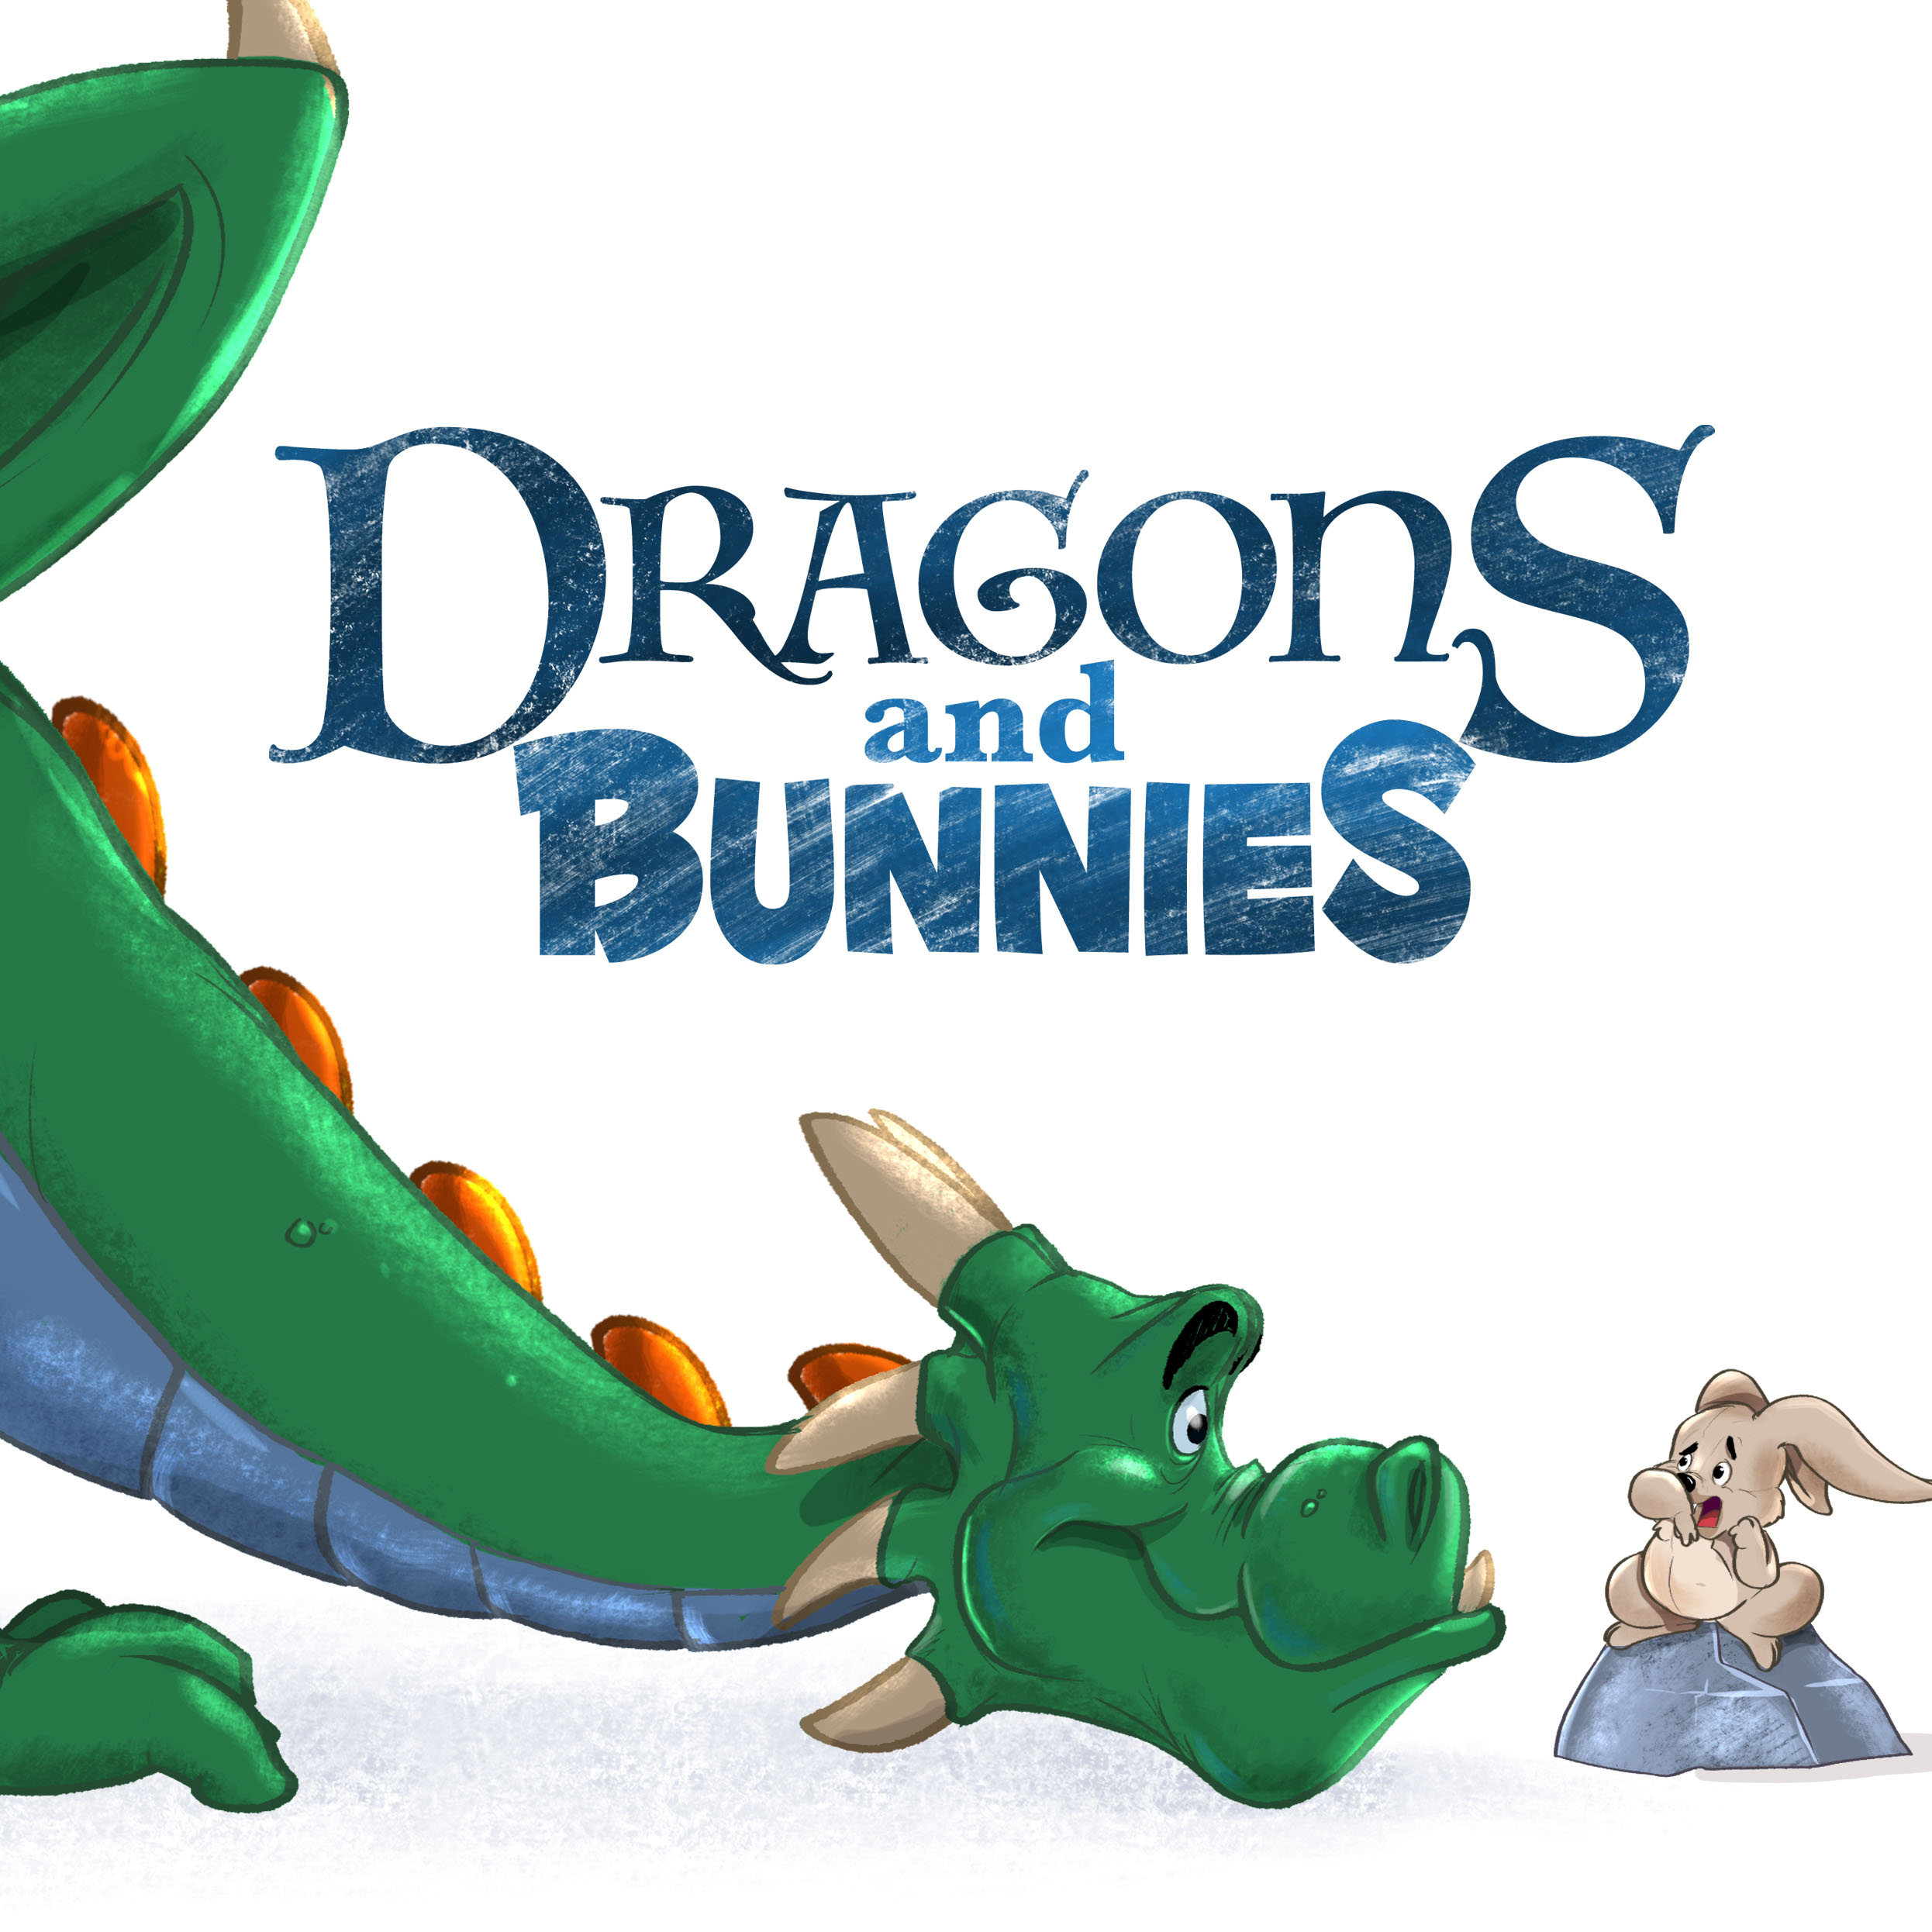 In Dragons and Bunnies, one of Bryson's Books' Best-Sellers, two characters "see past their differences and share exciting adventures together."